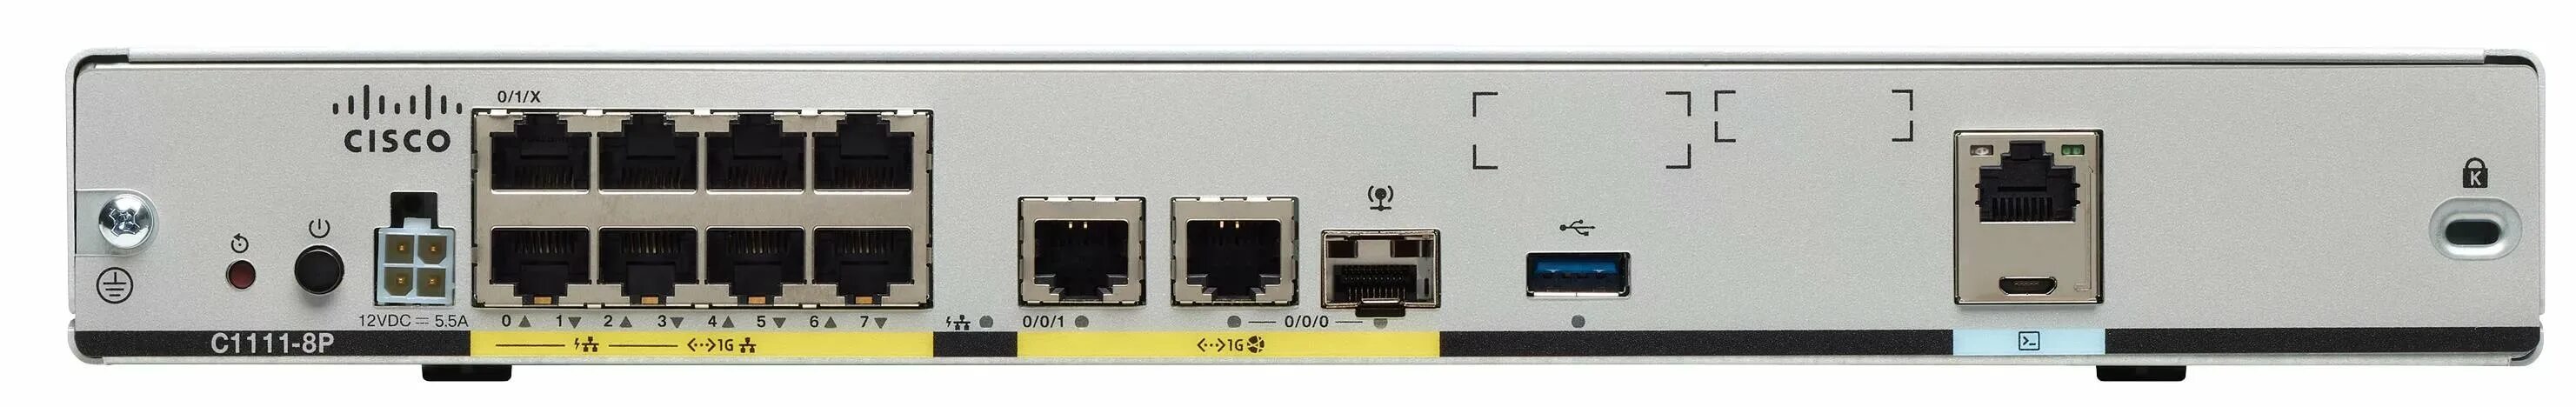 P 8 2 ответы. Маршрутизатор ISR 1100 8 Ports Dual ge Wan Ethernet Router. Cisco c1111-8p Router. Маршрутизатор Cisco ISR 1100 4 Ports Dual ge Wan. Cisco 1111-8p.